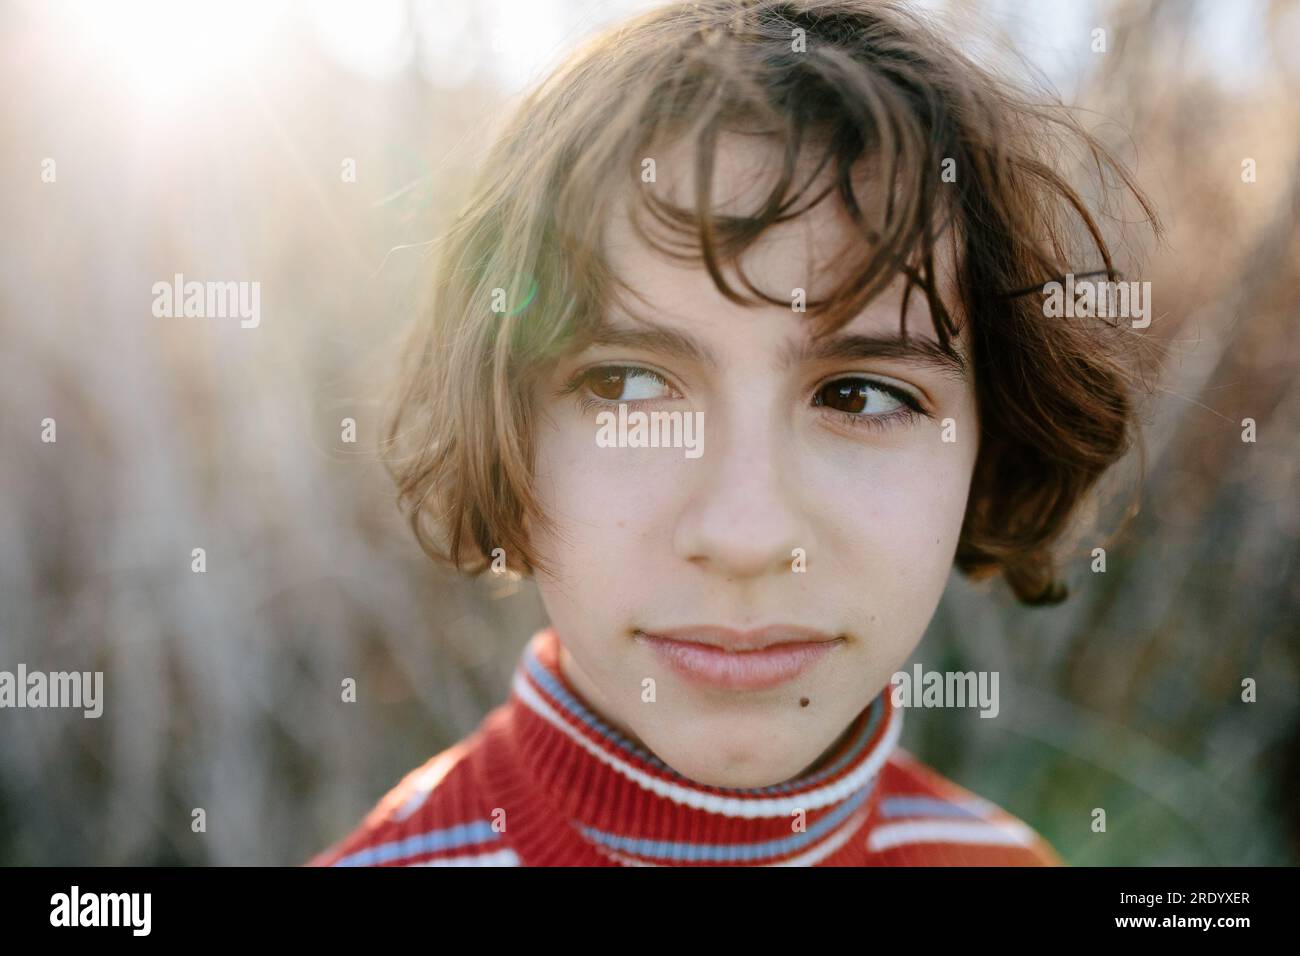 Closeup portrait of a young teen girl with a sideways glance Stock Photo